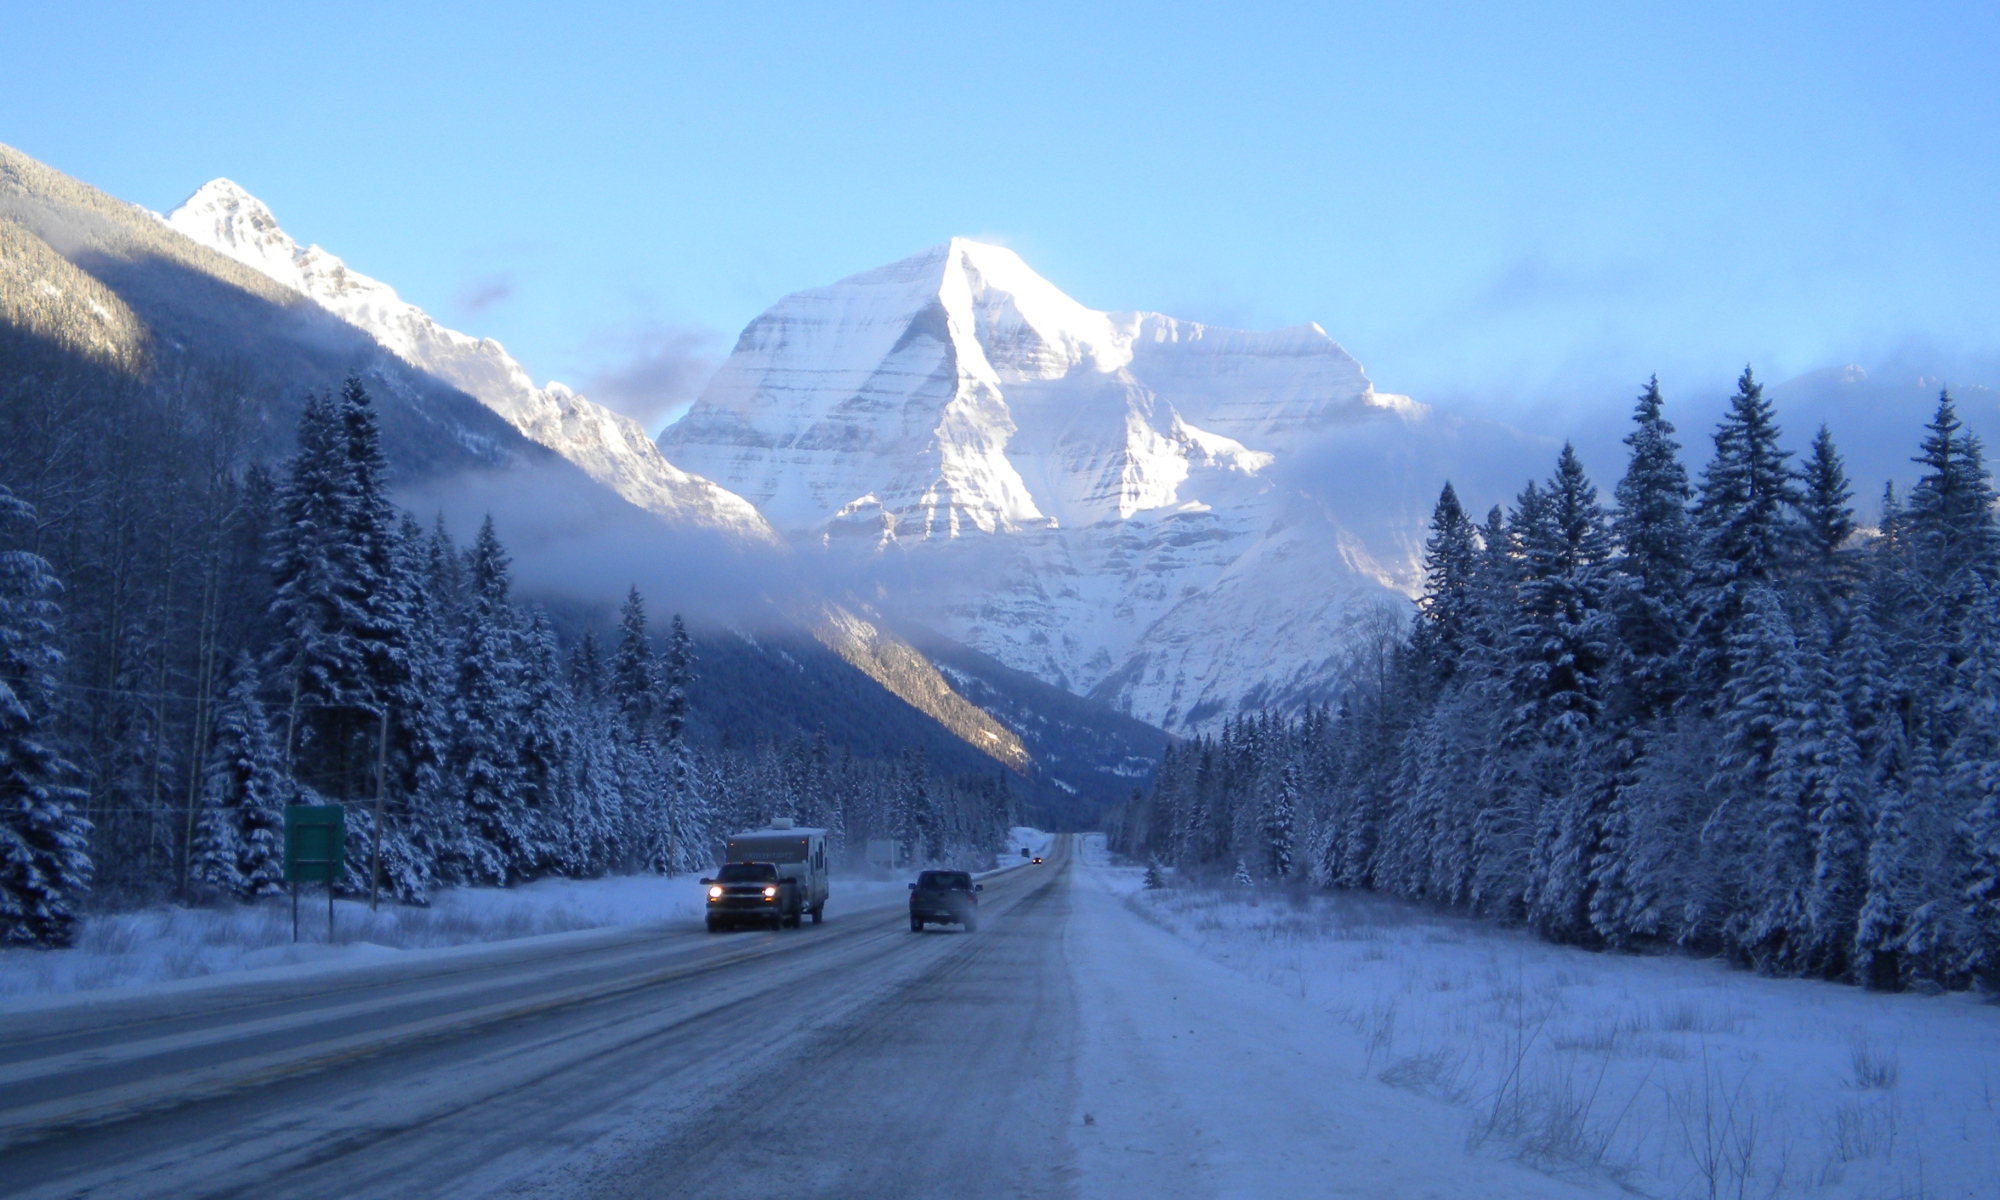 Mount Robson, in Mount Robson Provincial Park.